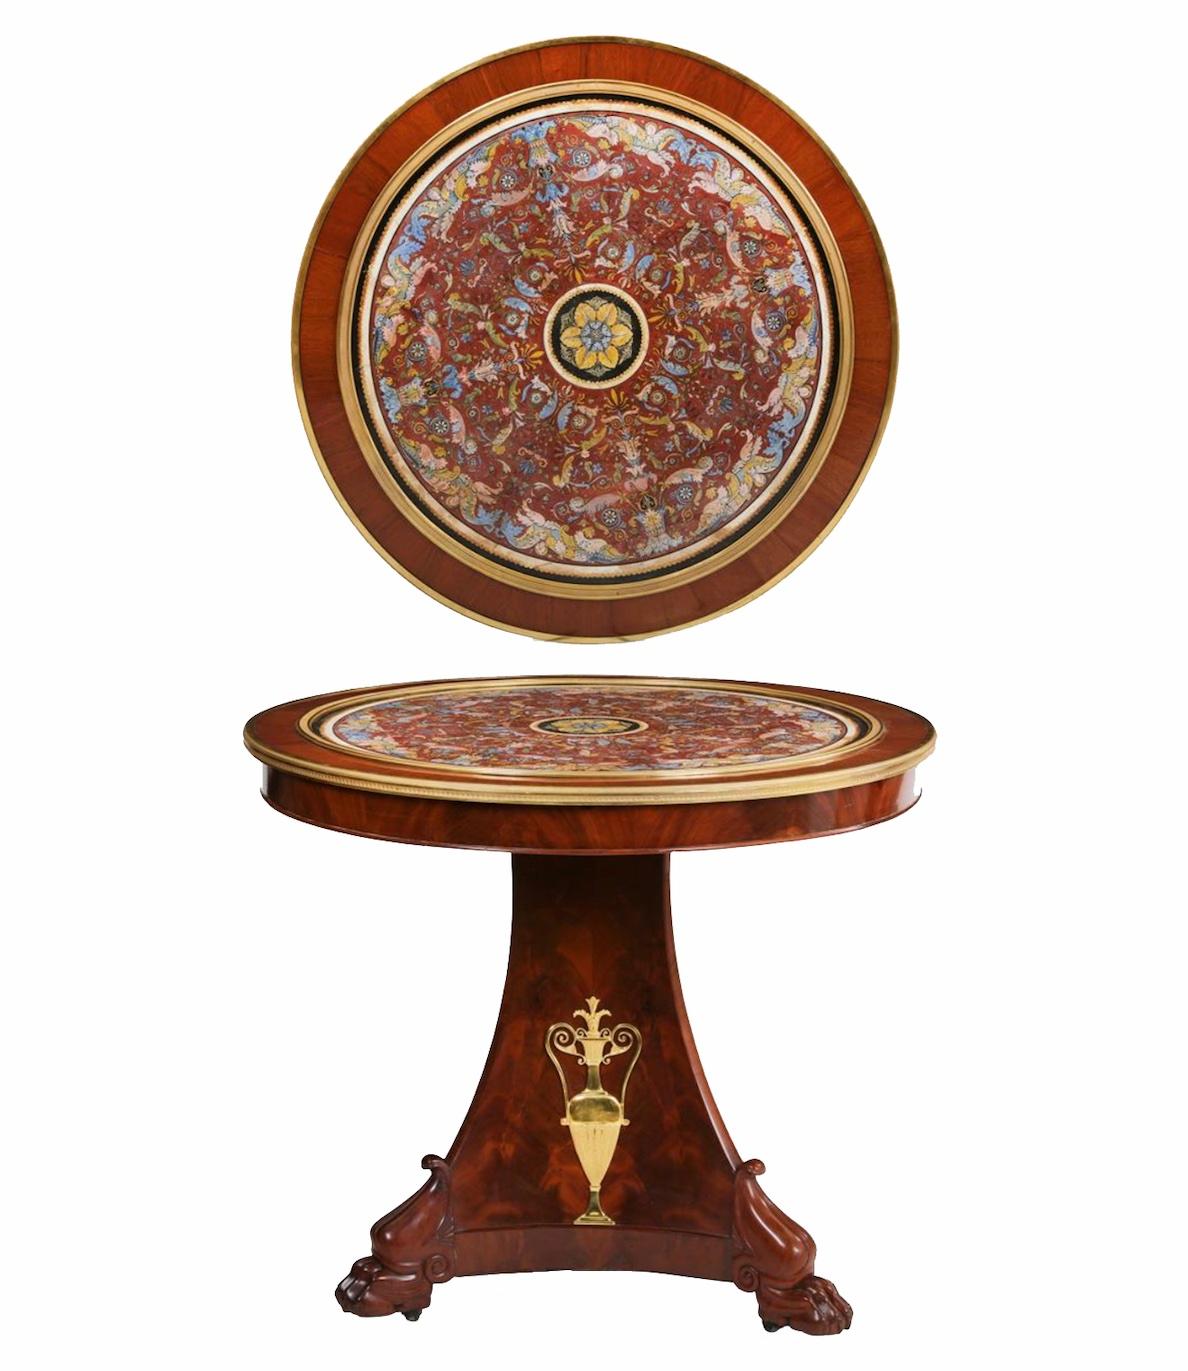 A 19th Century Continental Scagliola inset gilt bronze mounted mahogany center table.

Dimensions: 28.5